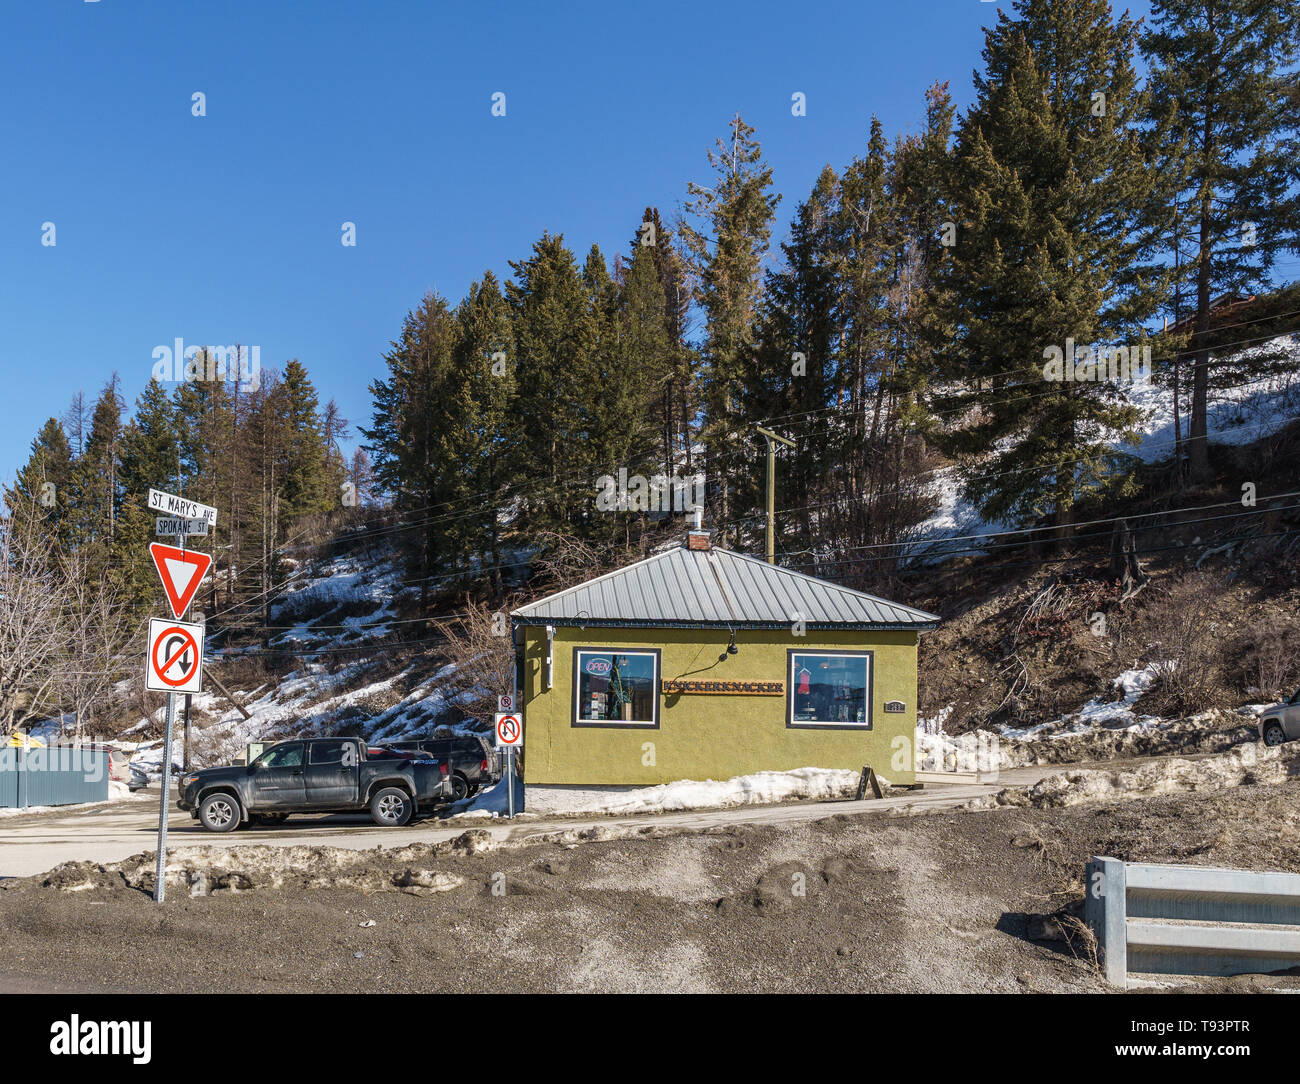 KIMBERLEY, CANADA - MARCH 19, 2019: street view and store front in small town british columbia. Stock Photo